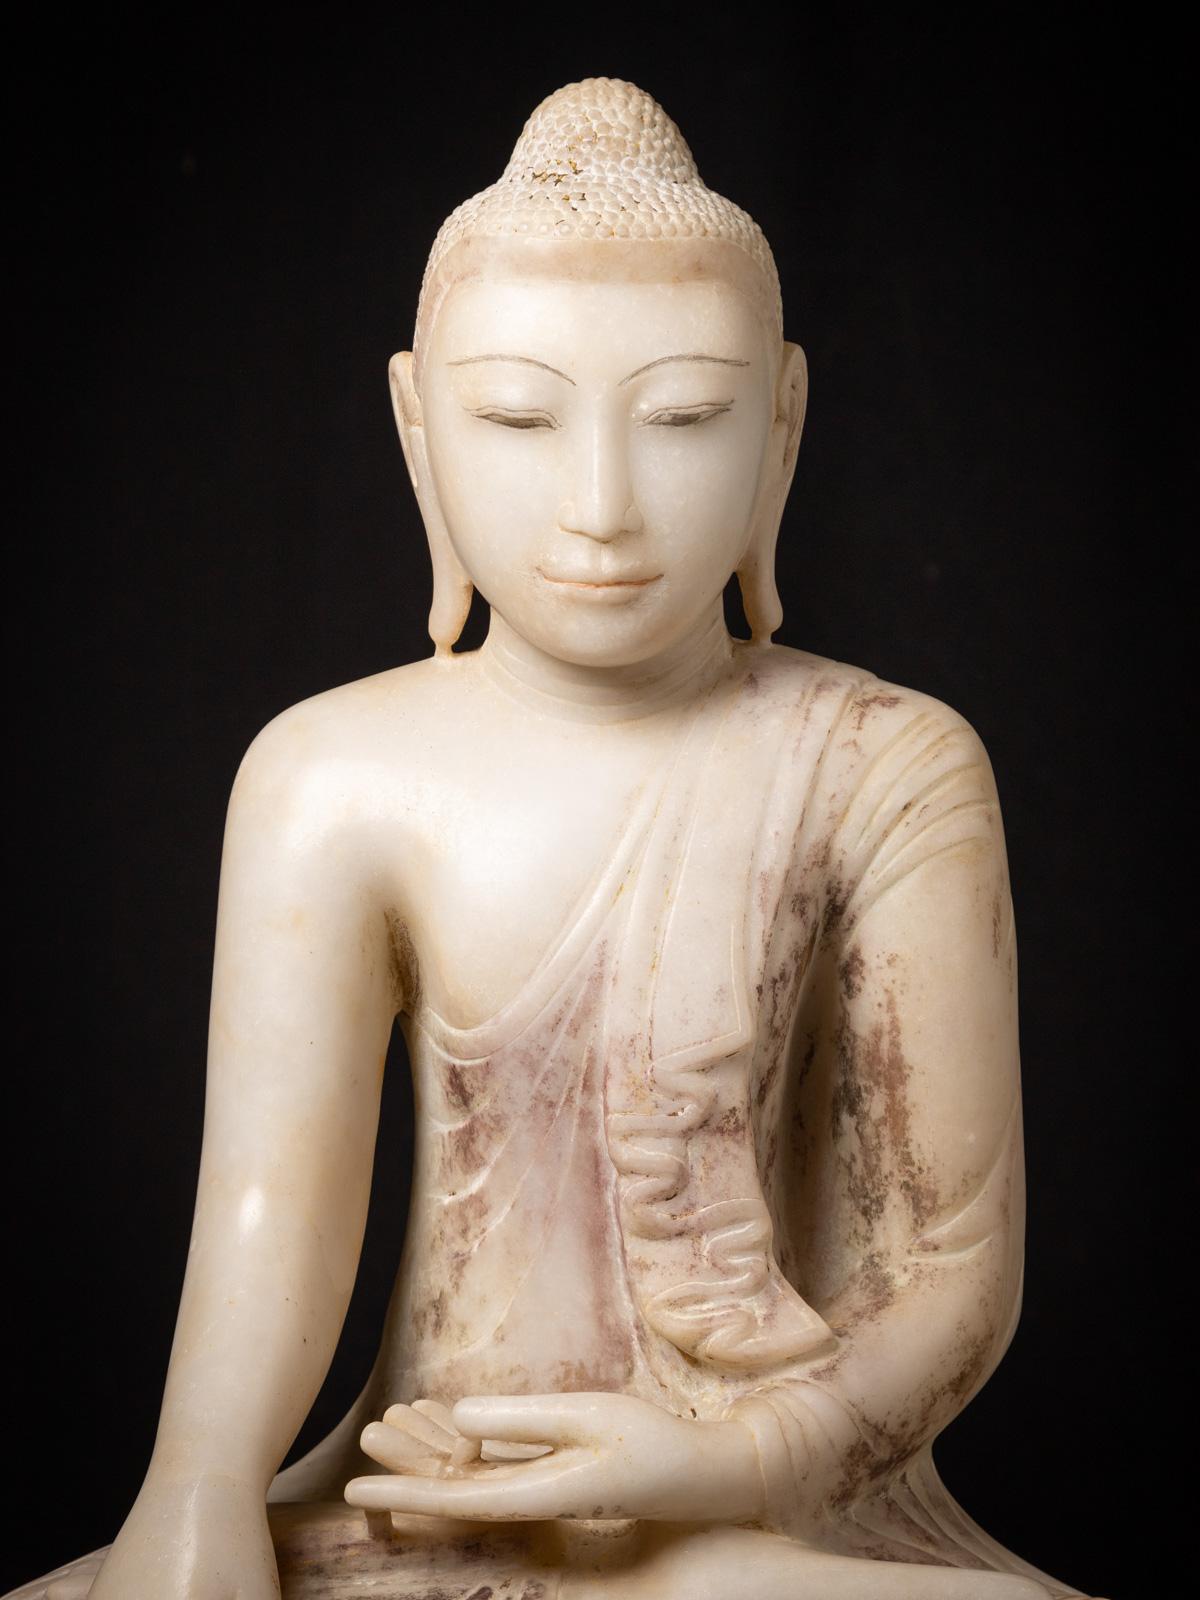 This antique Very special marble Burmese Buddha statue
 is a magnificent. Crafted from marble, it stands at an impressive height of 77 cm and has dimensions of 48 cm in width and 33 cm in depth. 

The statue is depicted in the Bhumisparsha mudra, a